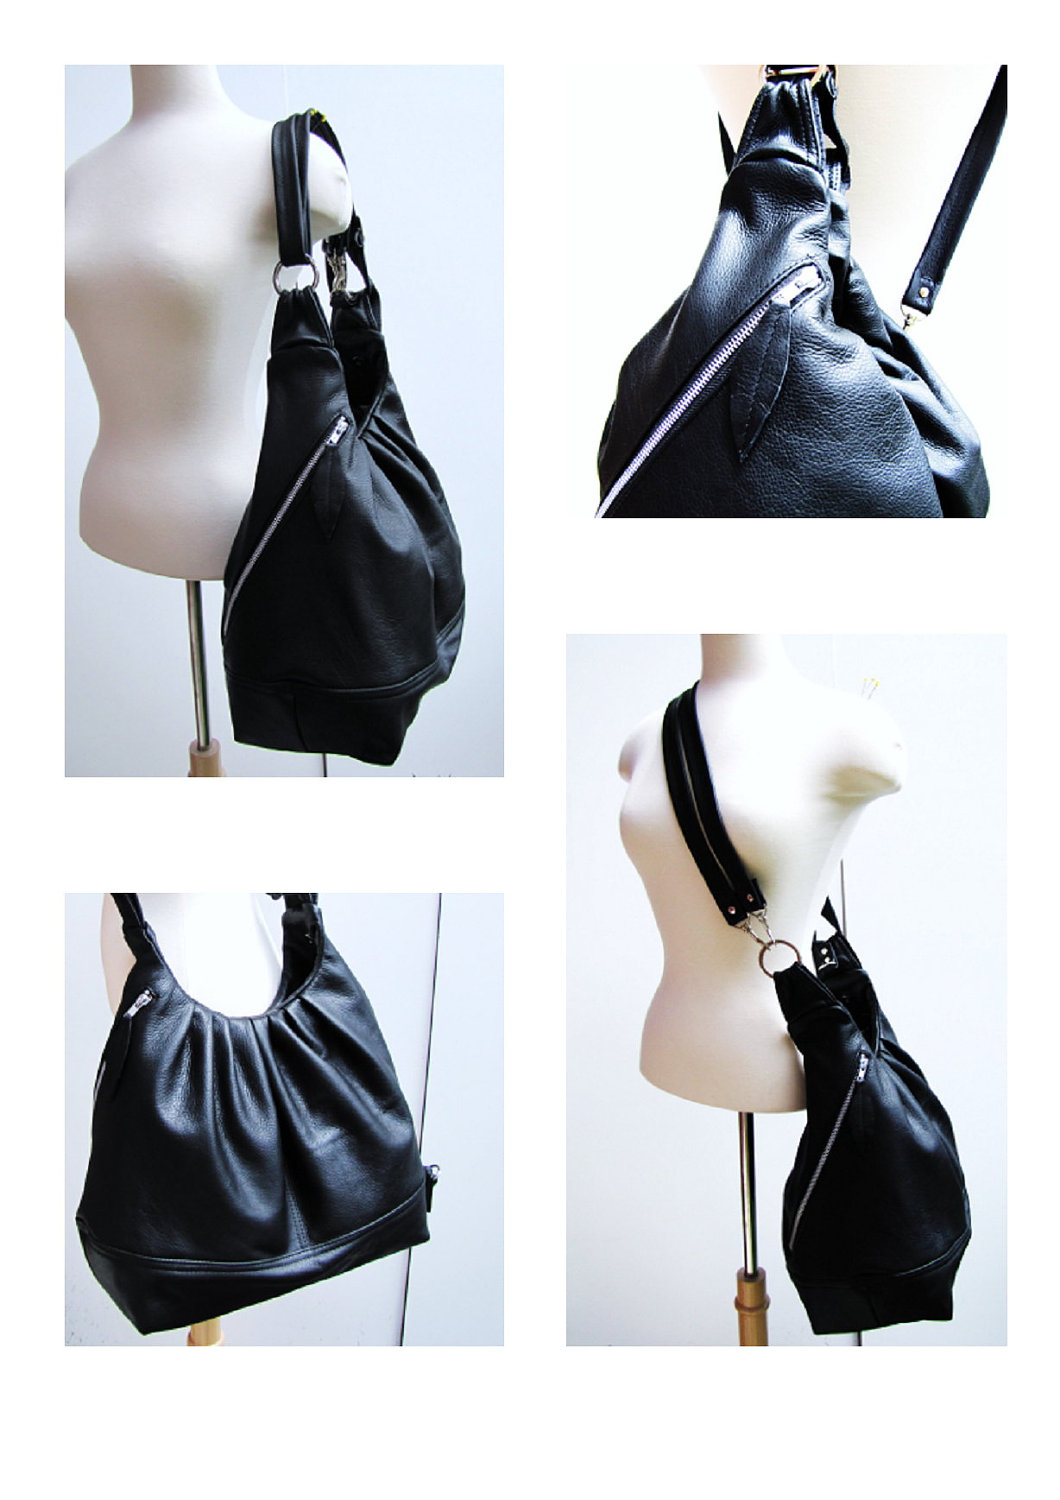 Black Leather Bag, Large 3 Way Bag, Convertible Purse, Women Packpack ...